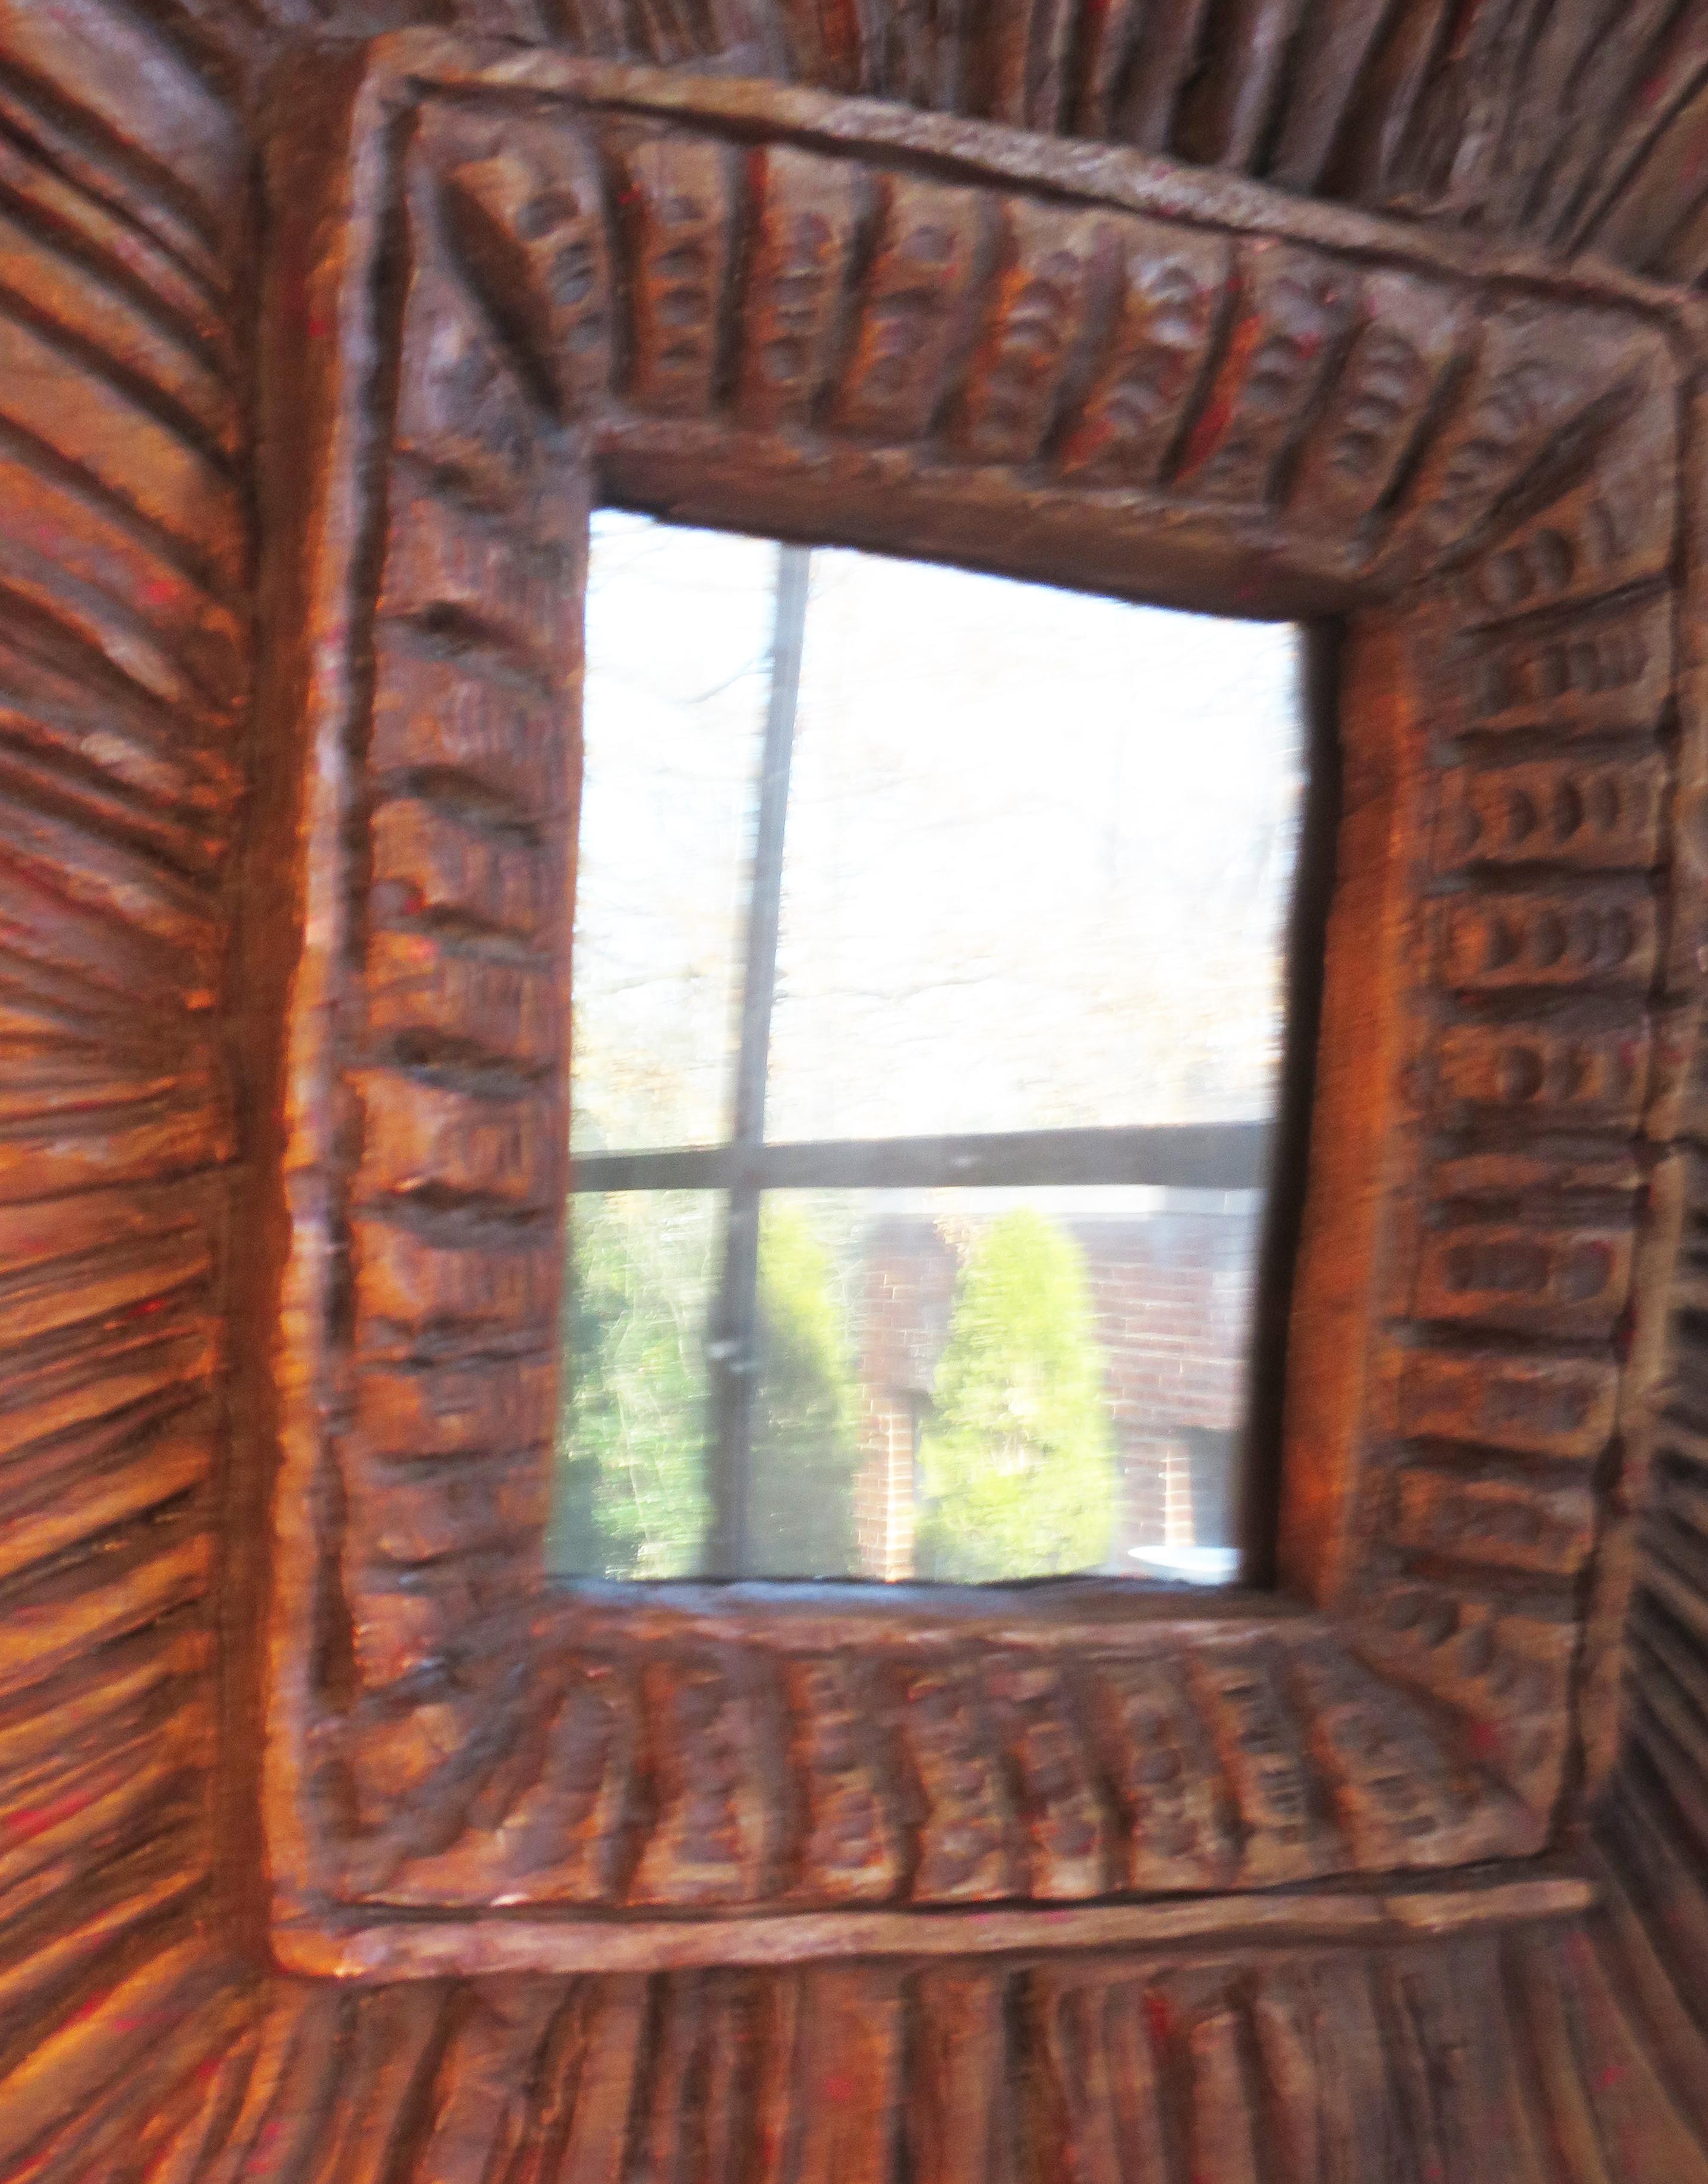 A primitive version of a sunburst mirror. Made of resin. Heavy. Good presence.
Signed and dated 